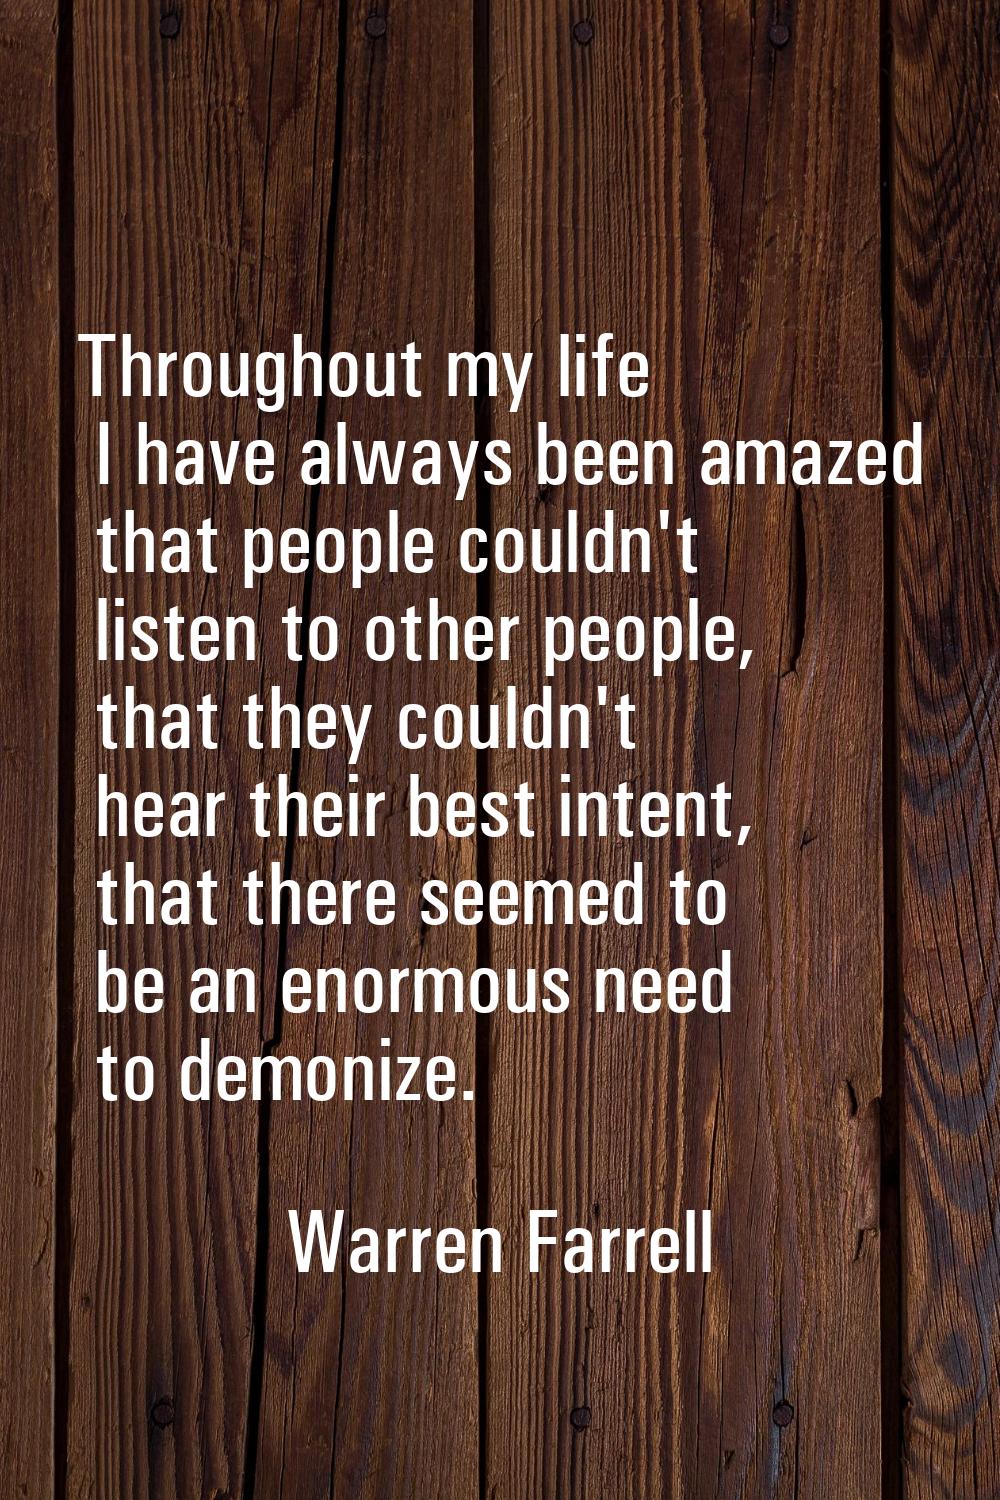 Throughout my life I have always been amazed that people couldn't listen to other people, that they